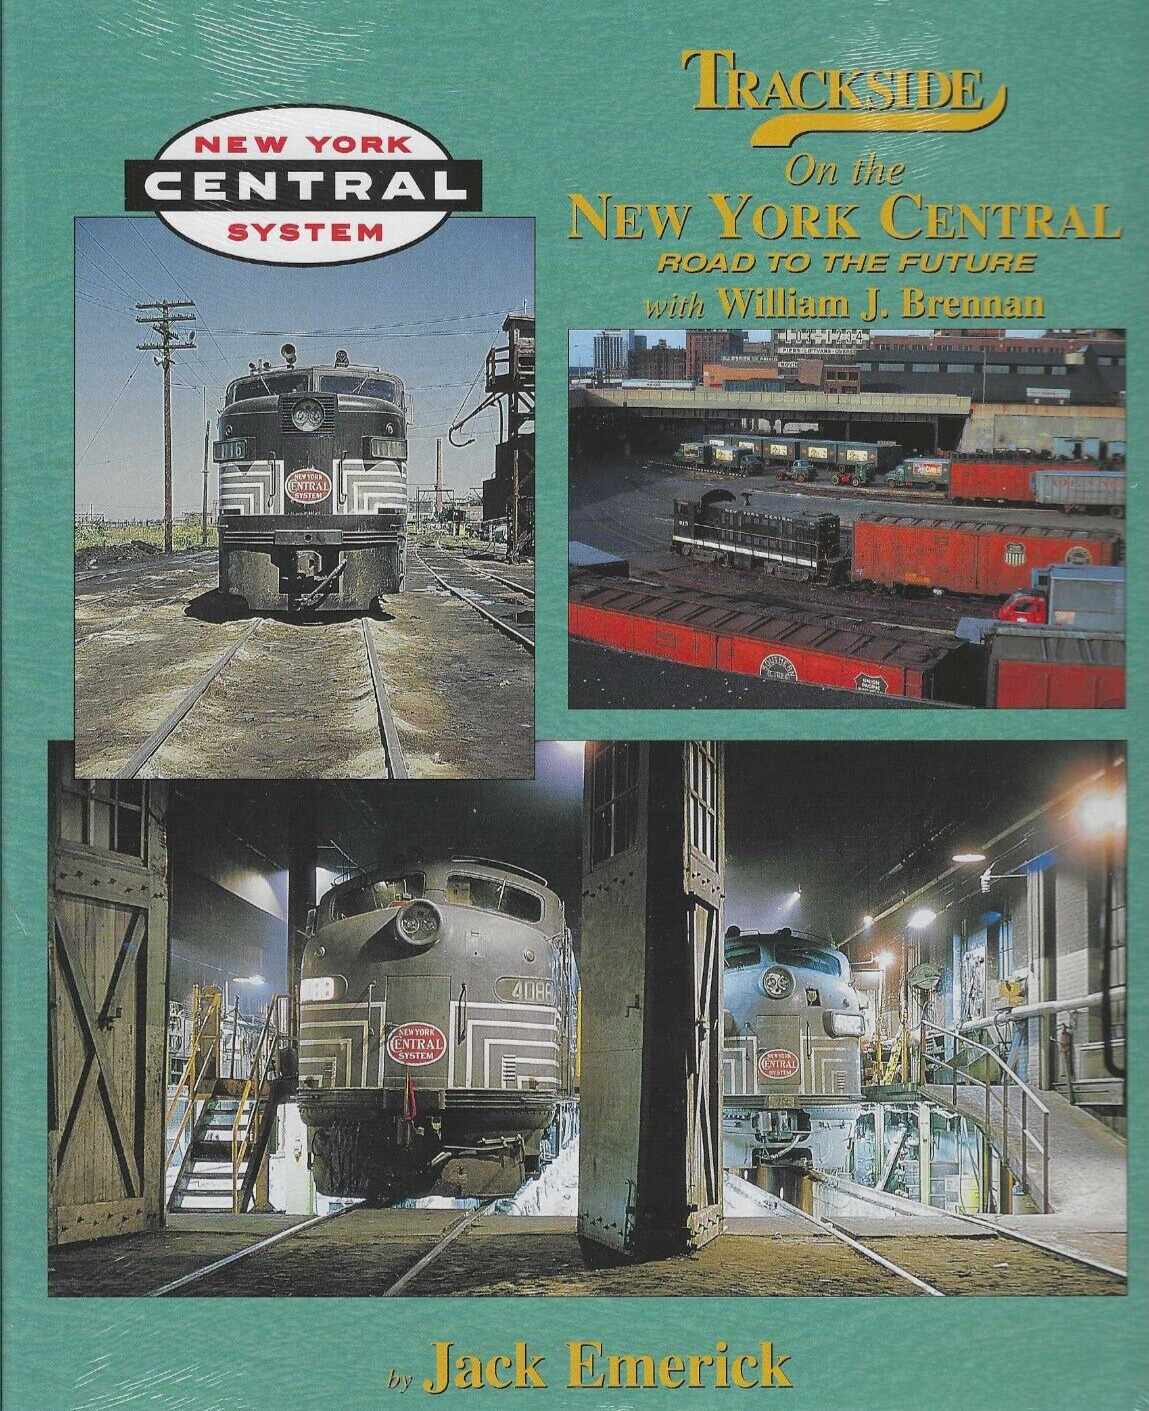 Trackside on the NEW YORK CENTRAL, Road to the Future - (BRAND NEW BOOK)